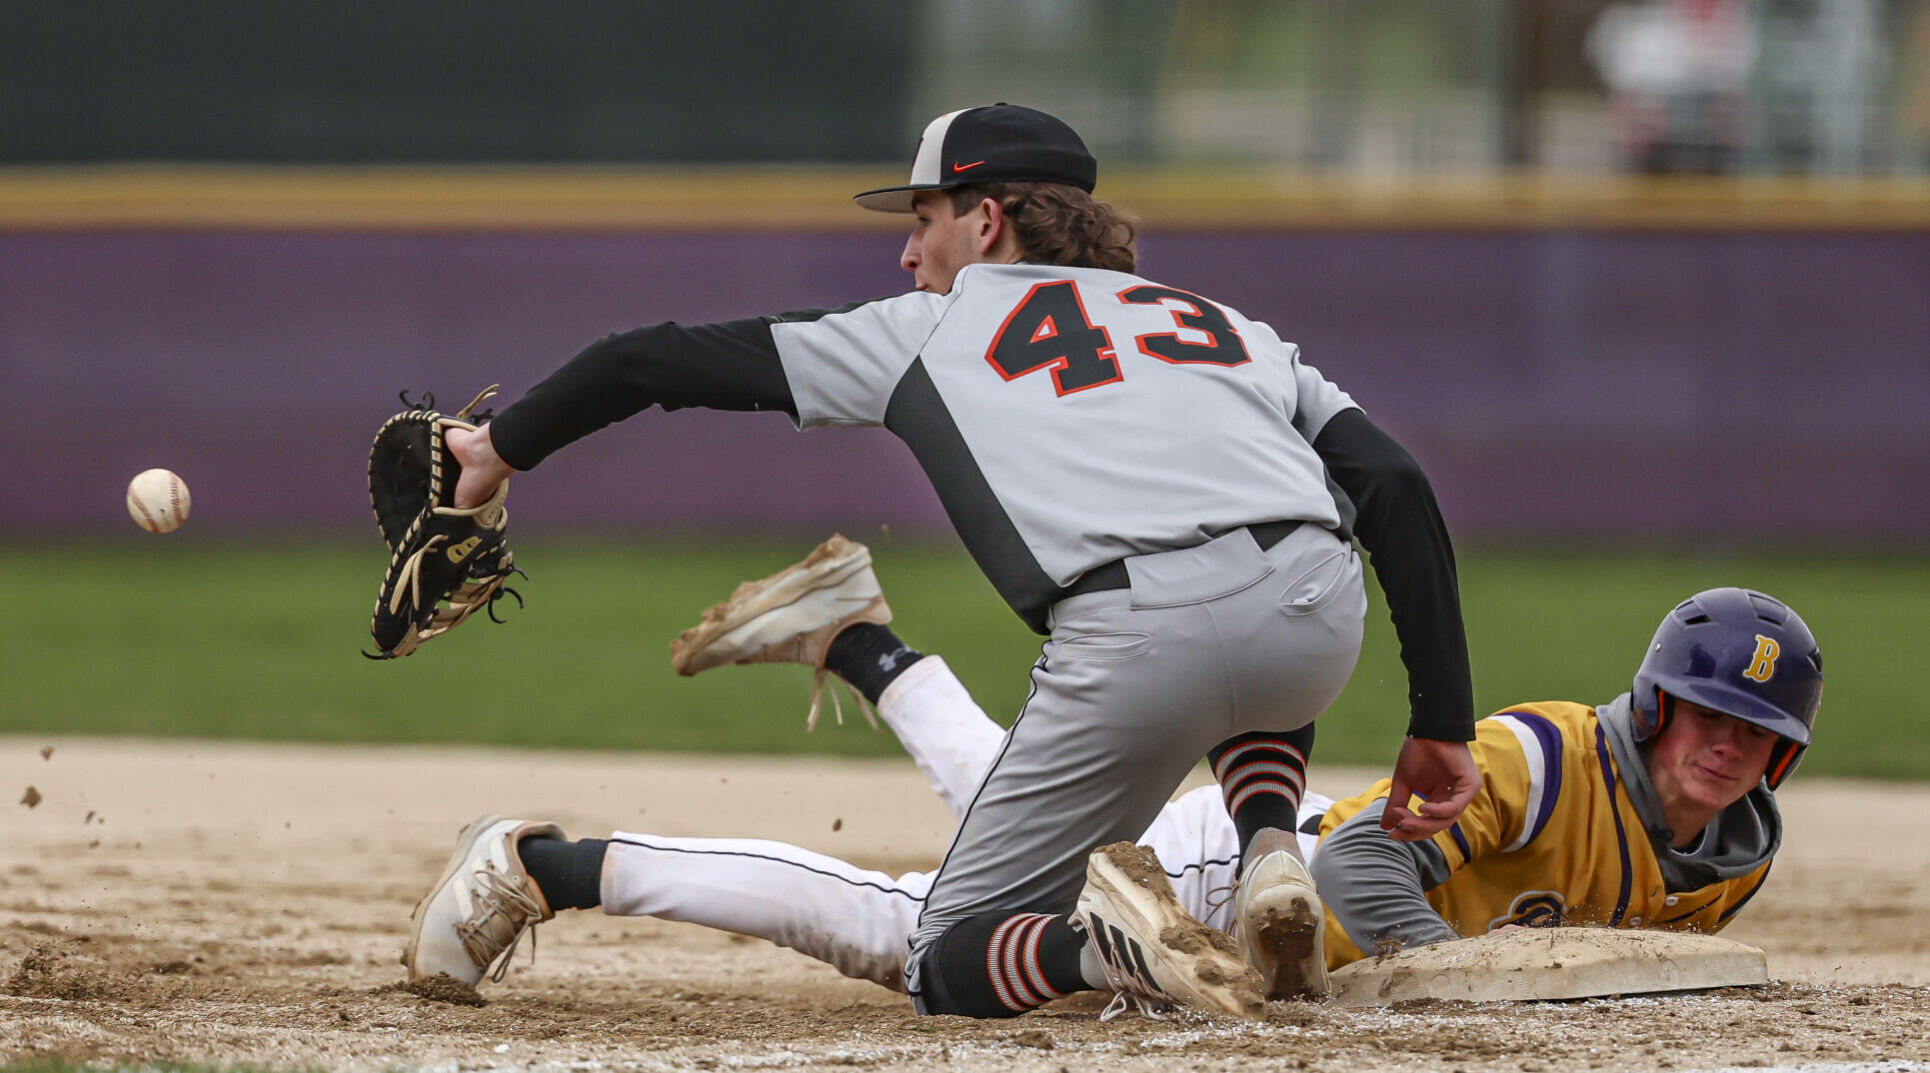 Normal West High School Baseball Team’s 8th Inning Rally Secures Victory Over Bloomington